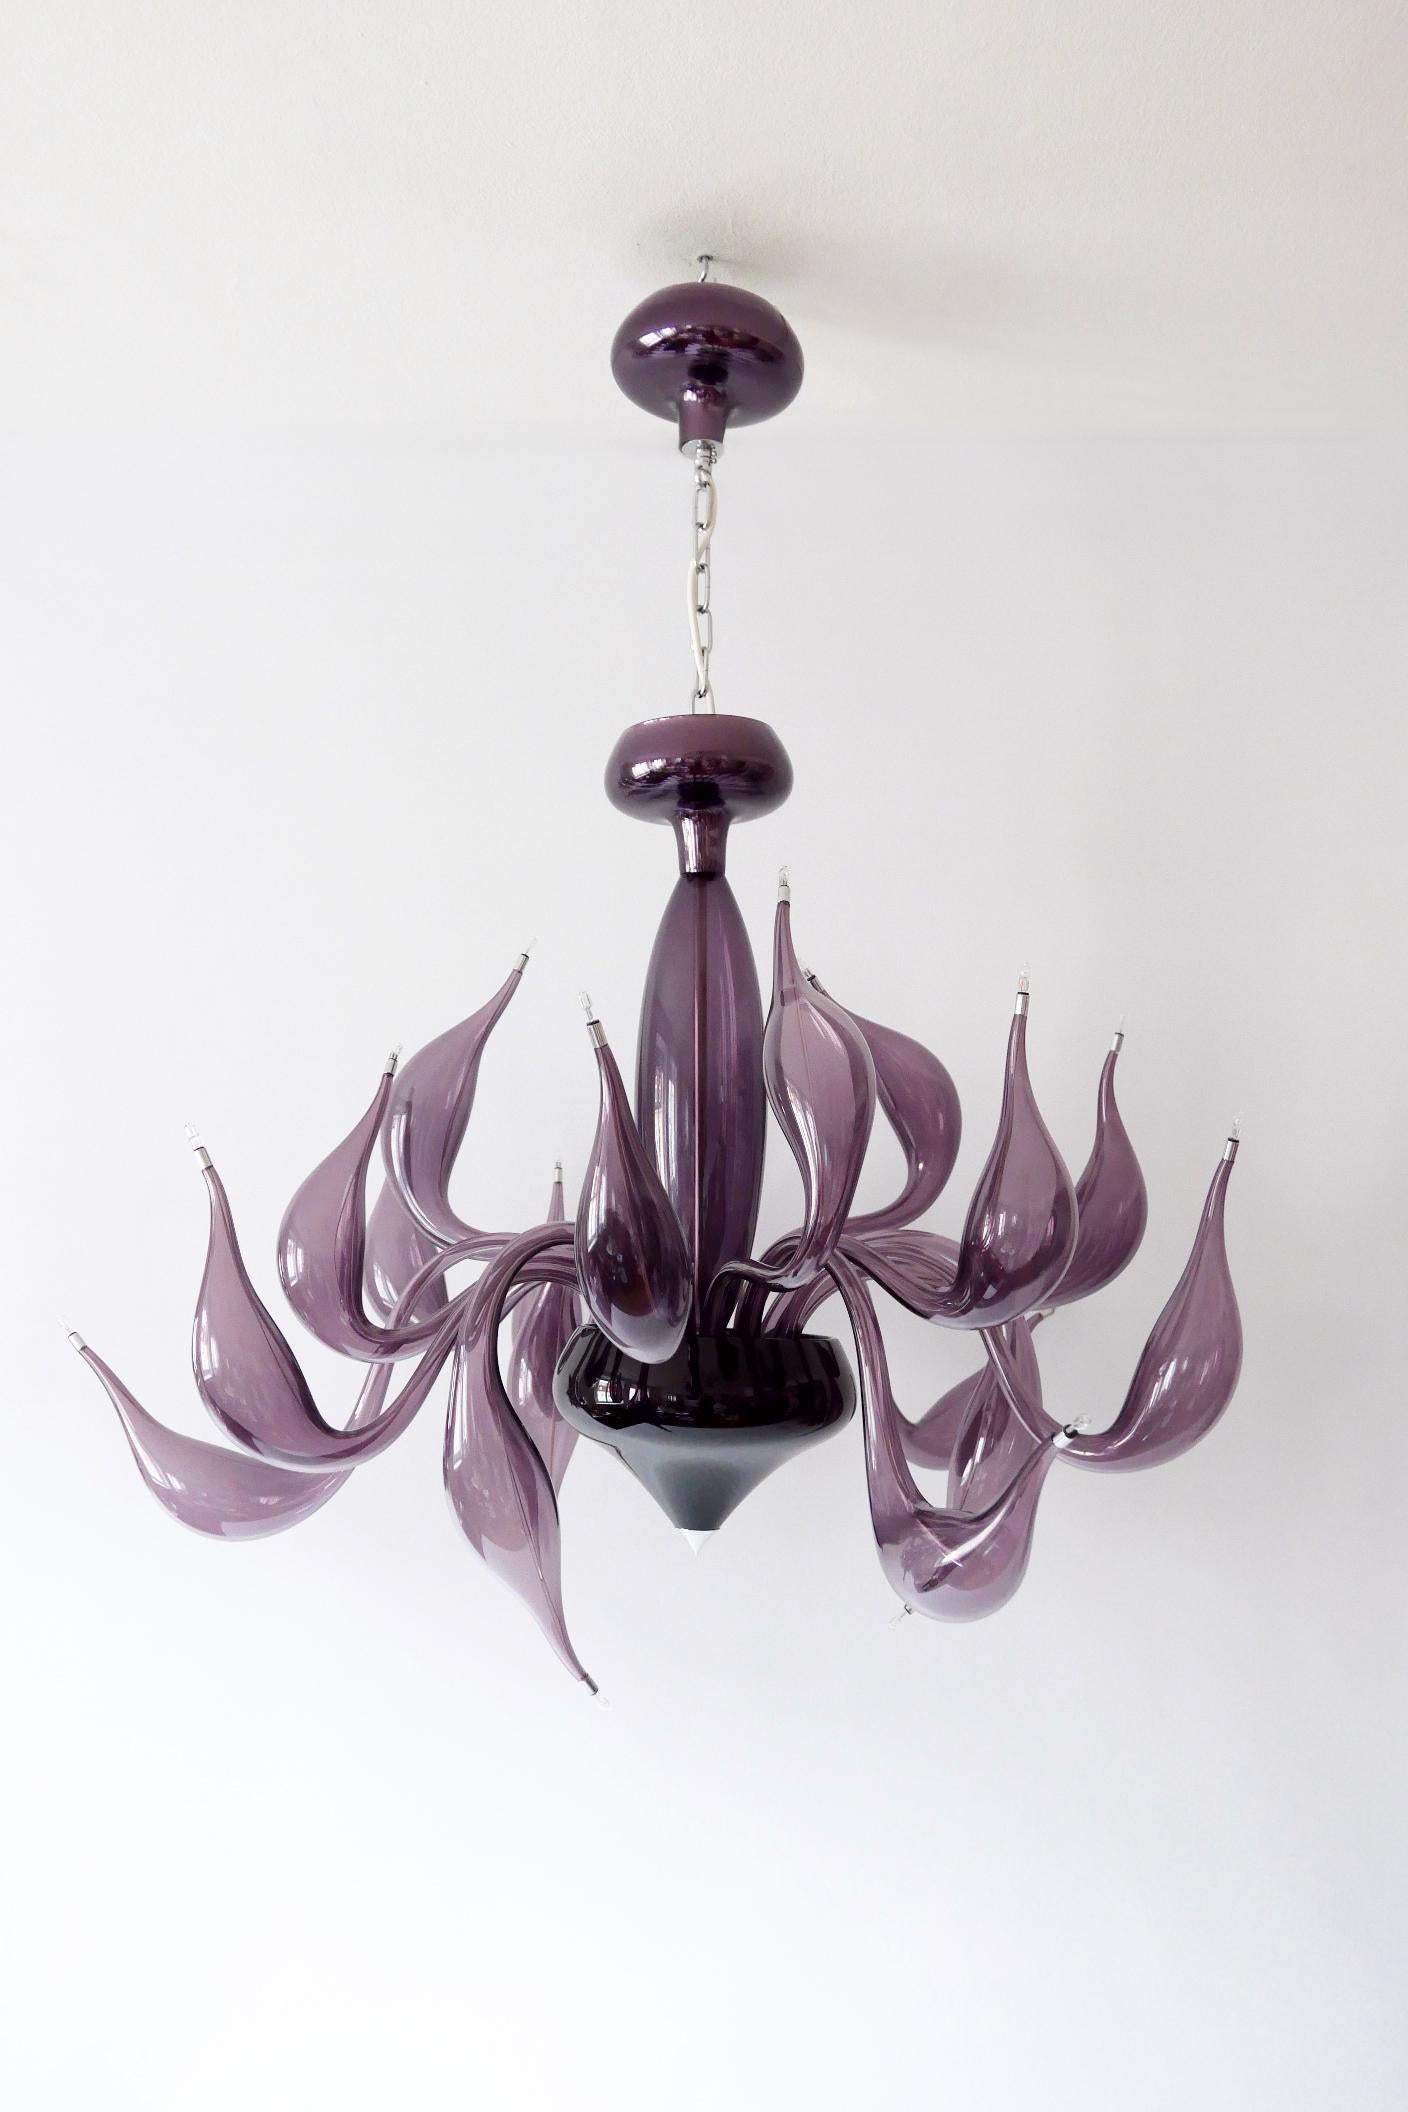 Sculptural Lu Murano Chandelier 18 Lights by Fabio Fornasier, 2004, Italy For Sale 2